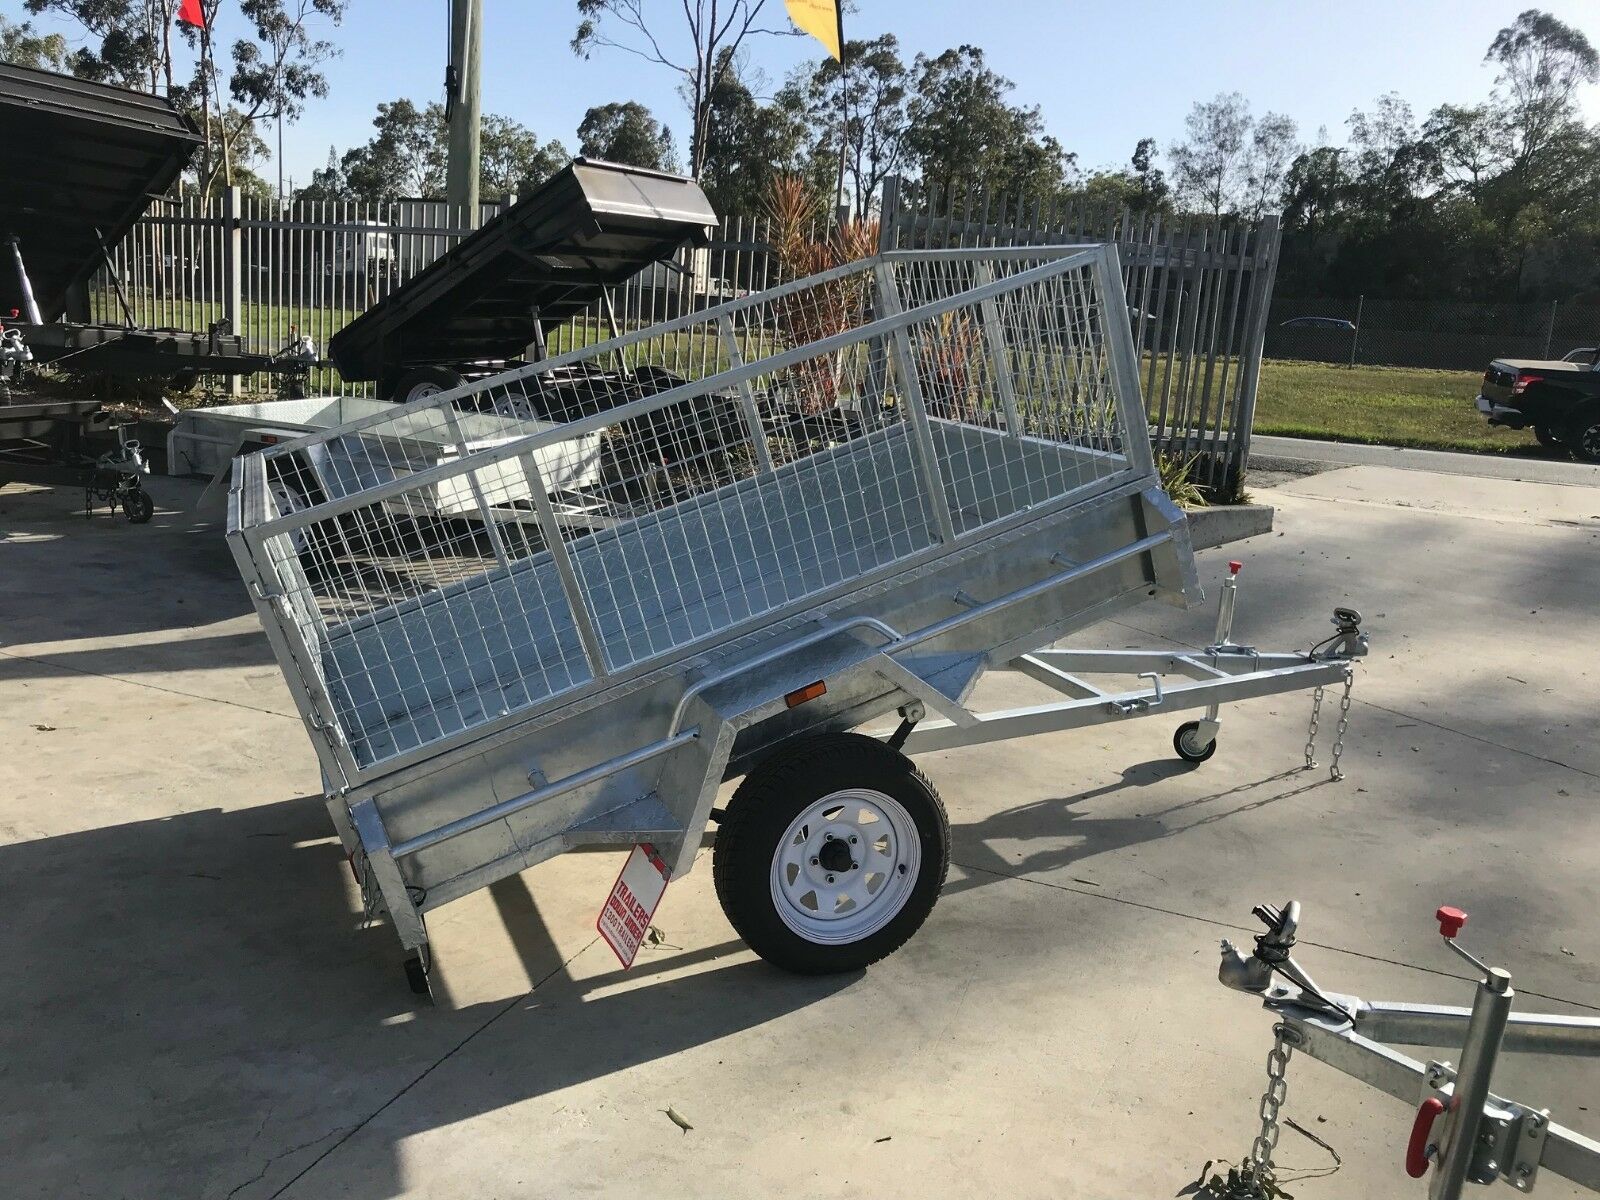 7×4 Heavy Duty Single Axle Galvanised Box Trailer with 2 Ft Cage for Sale in Brisbane<br><br><span class="galv-import">Imported Trailer</span>